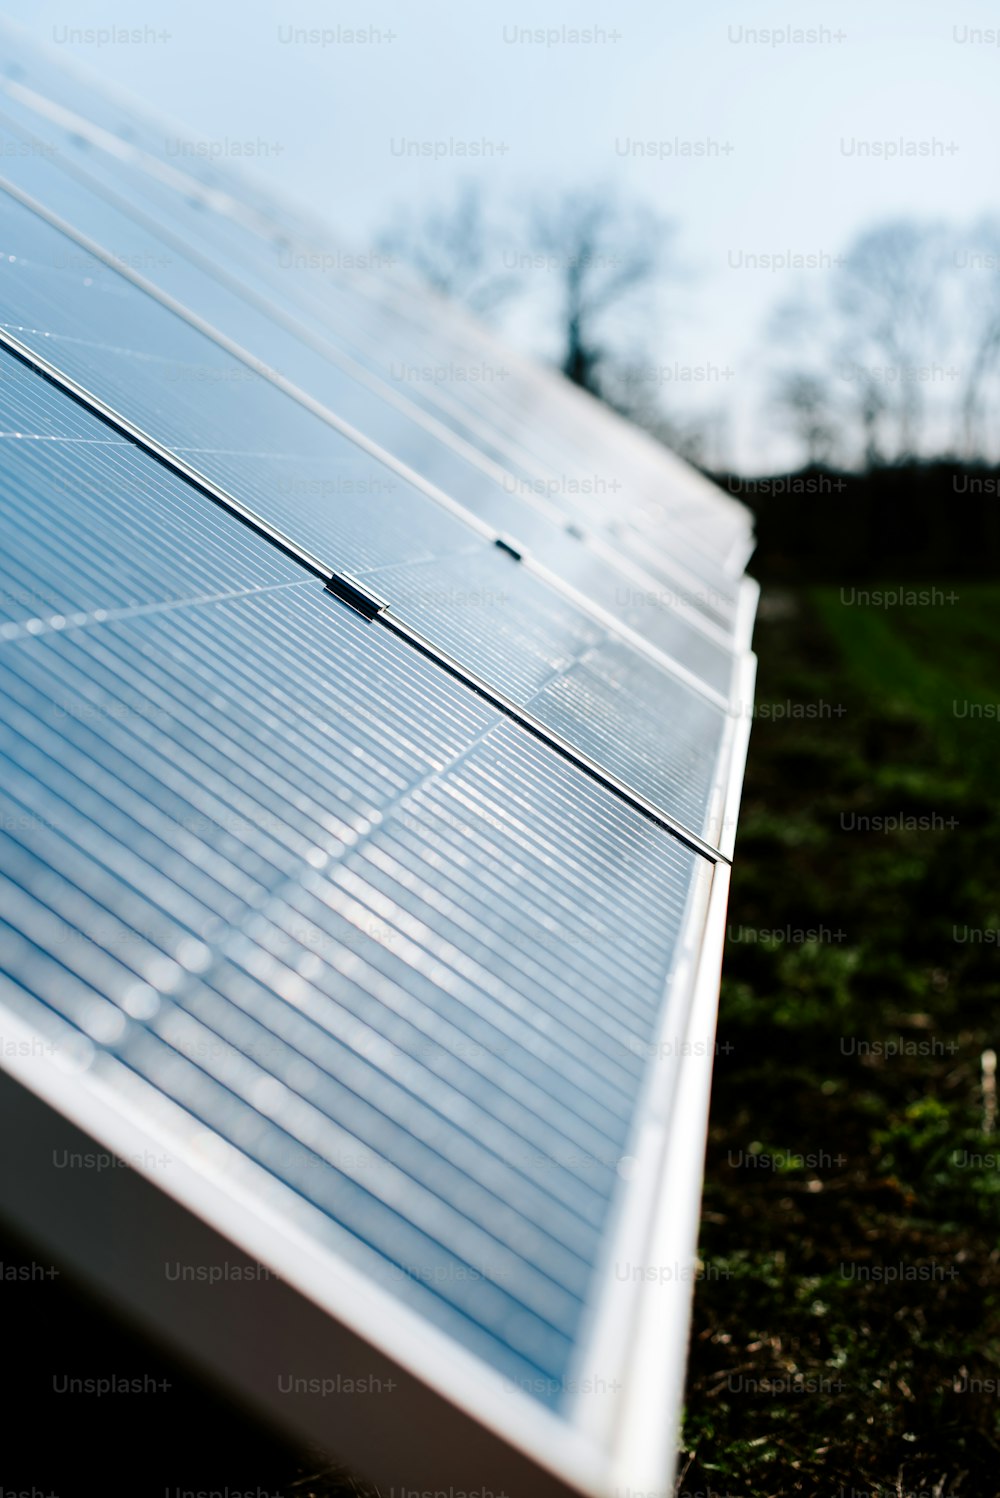 a close up of a solar panel in a field